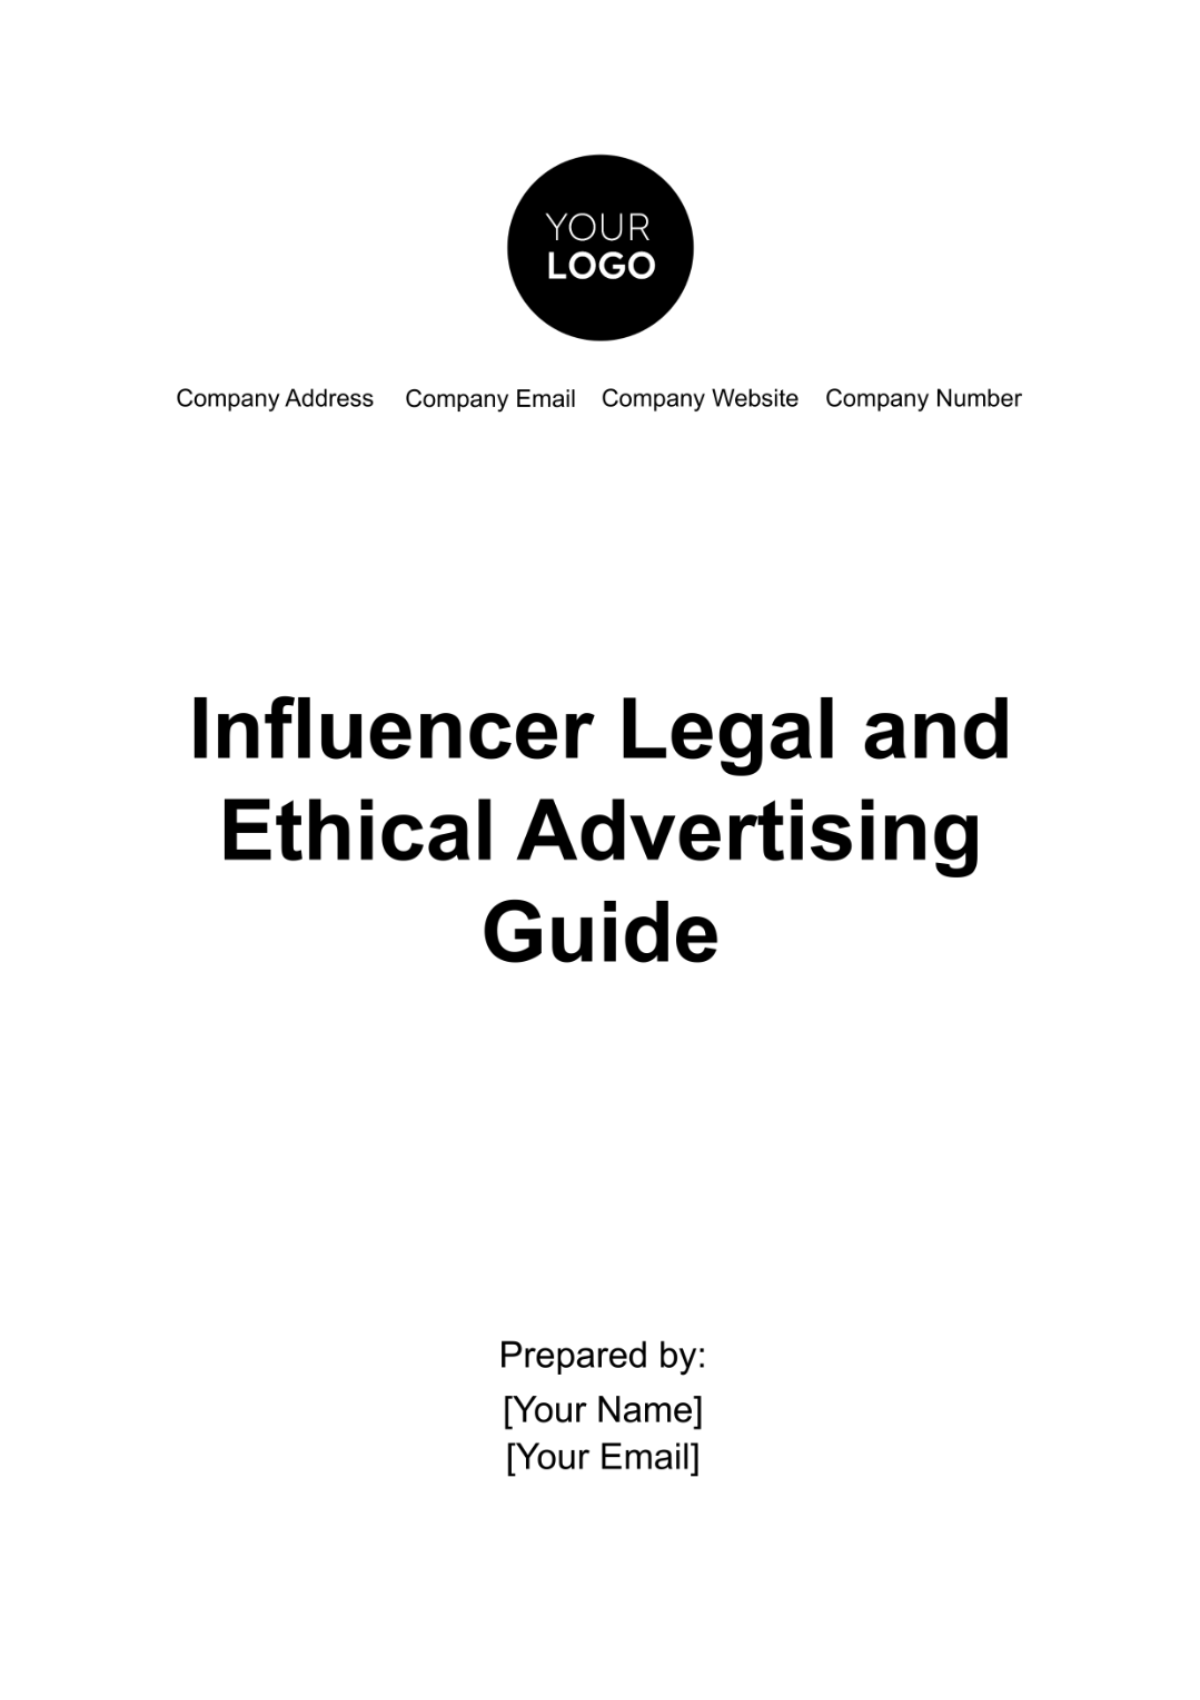 Influencer Legal and Ethical Advertising Guide Template